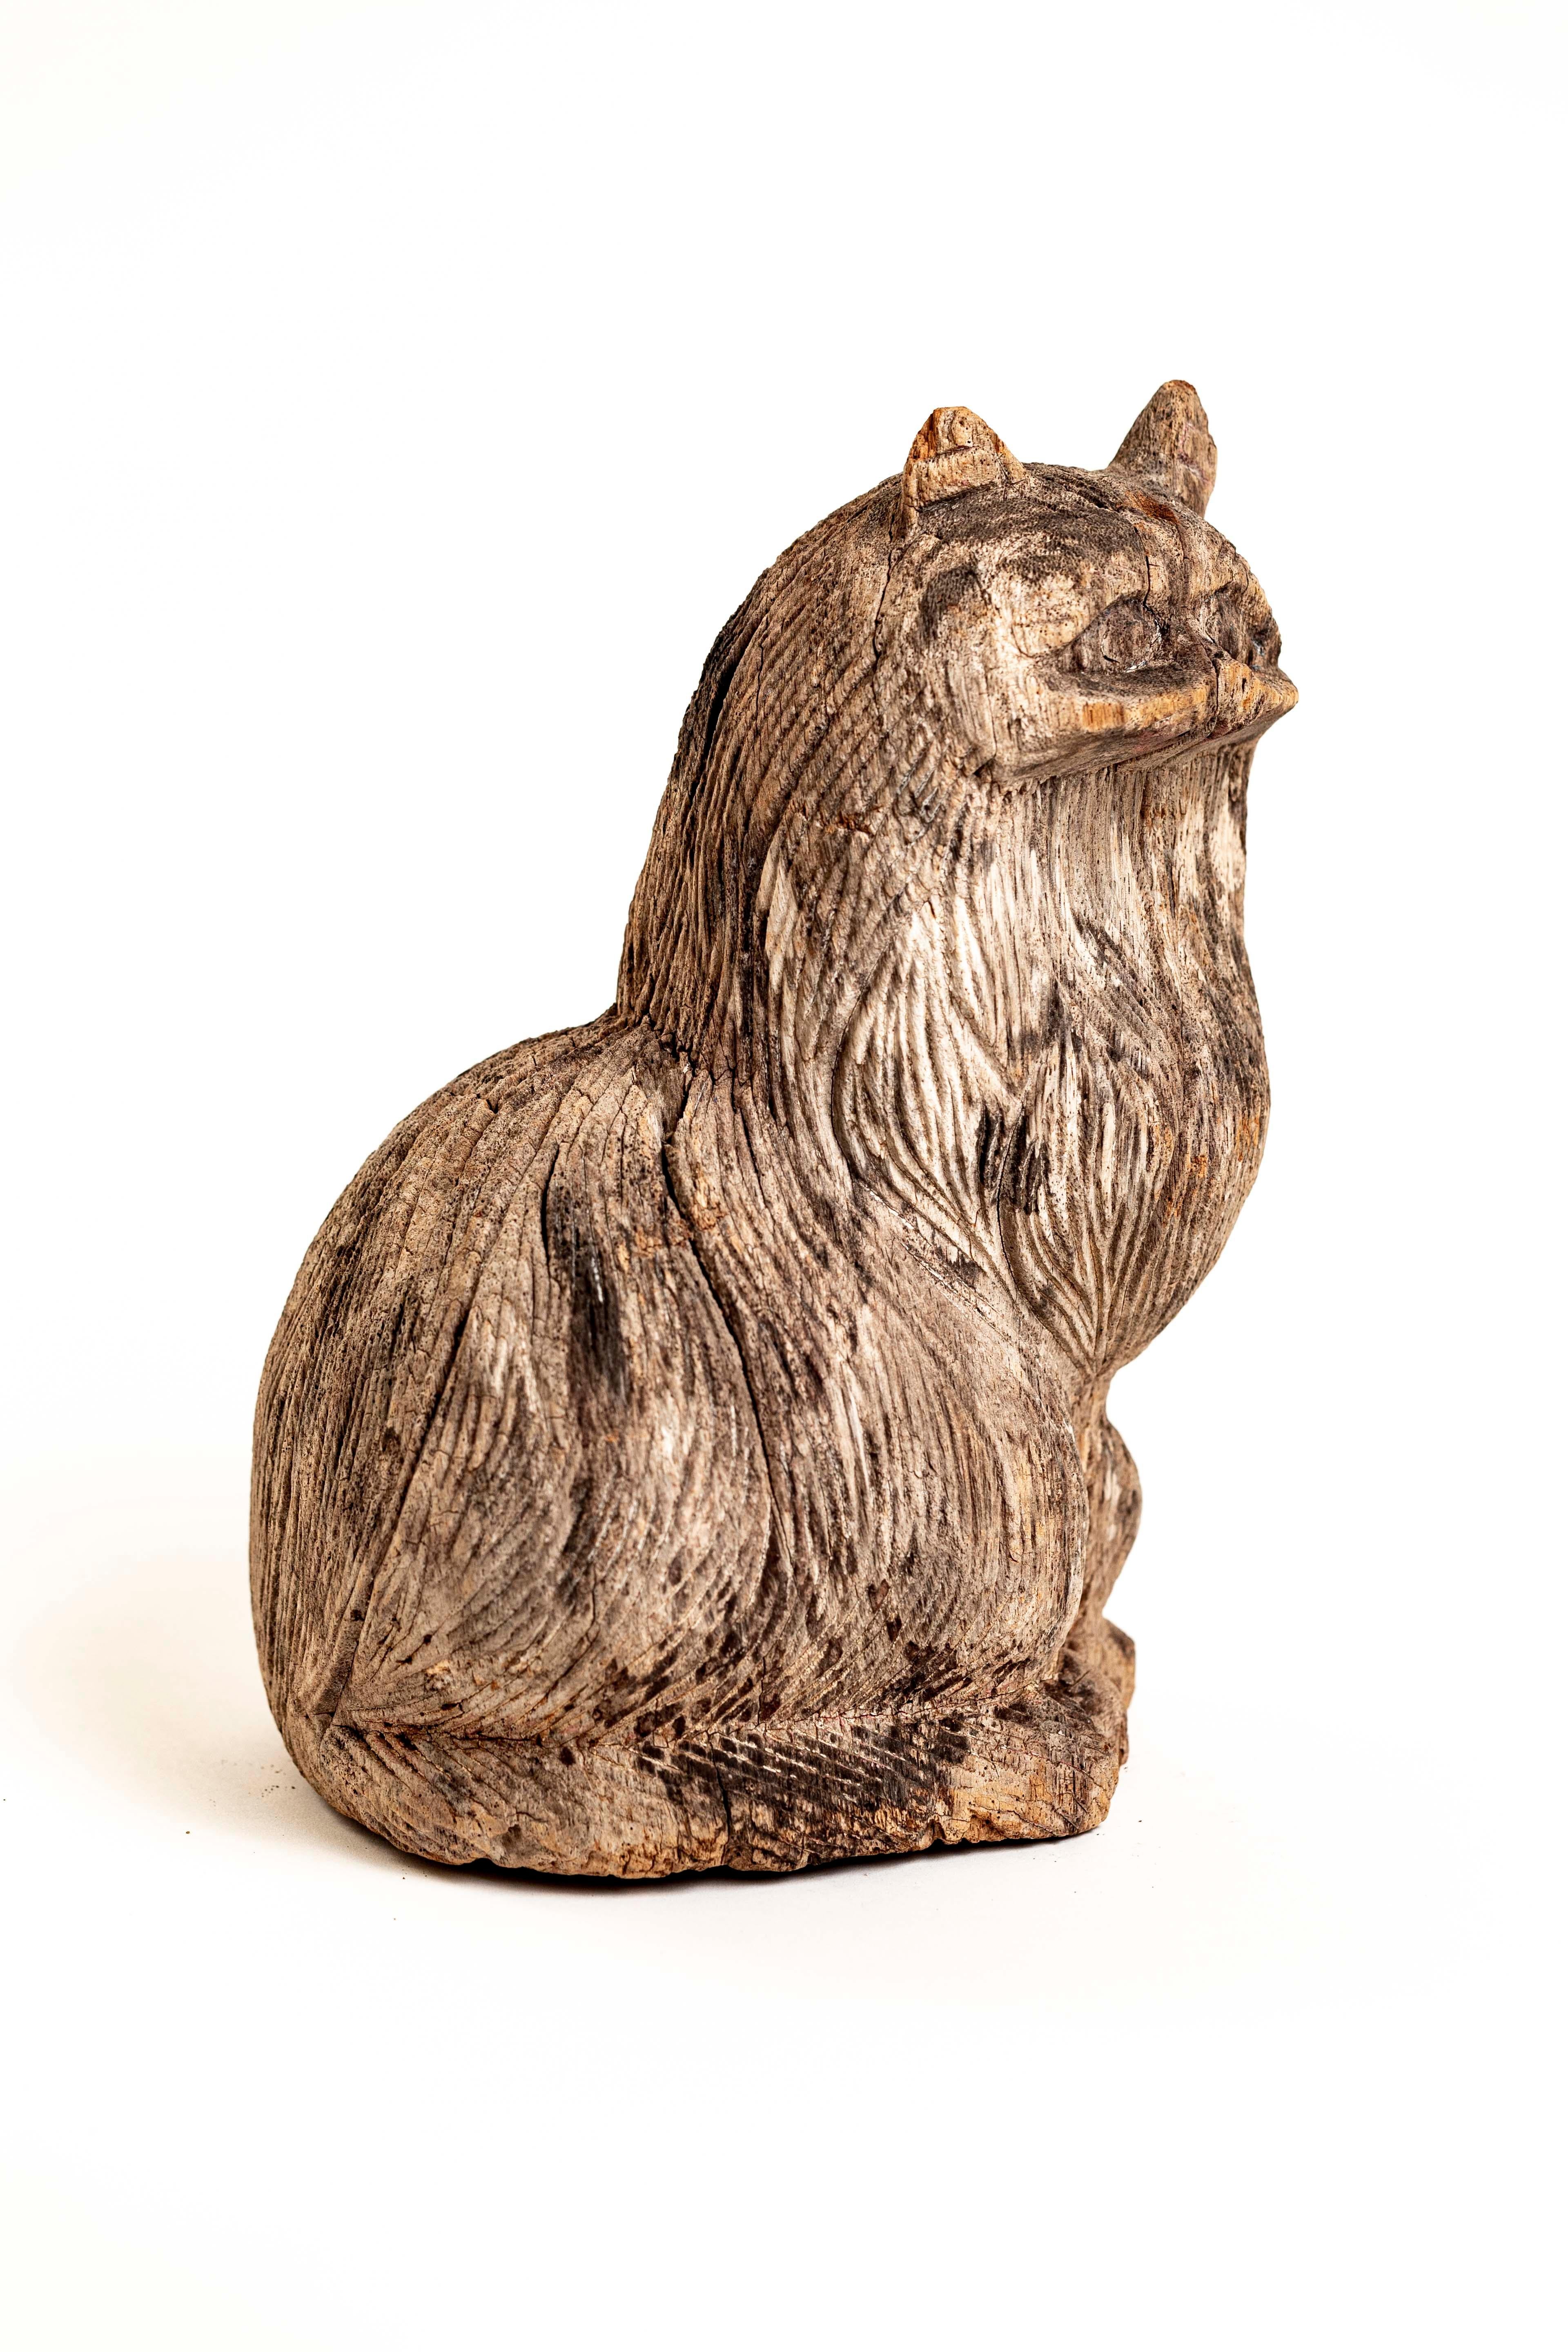 Available for purchase is a lovely sculpture of a life-sized feline friend with lots of detail and a charming personality. This vintage statue is fine example of American Folk Art, artfully hand carved from one-piece of heavy solid wood and has a